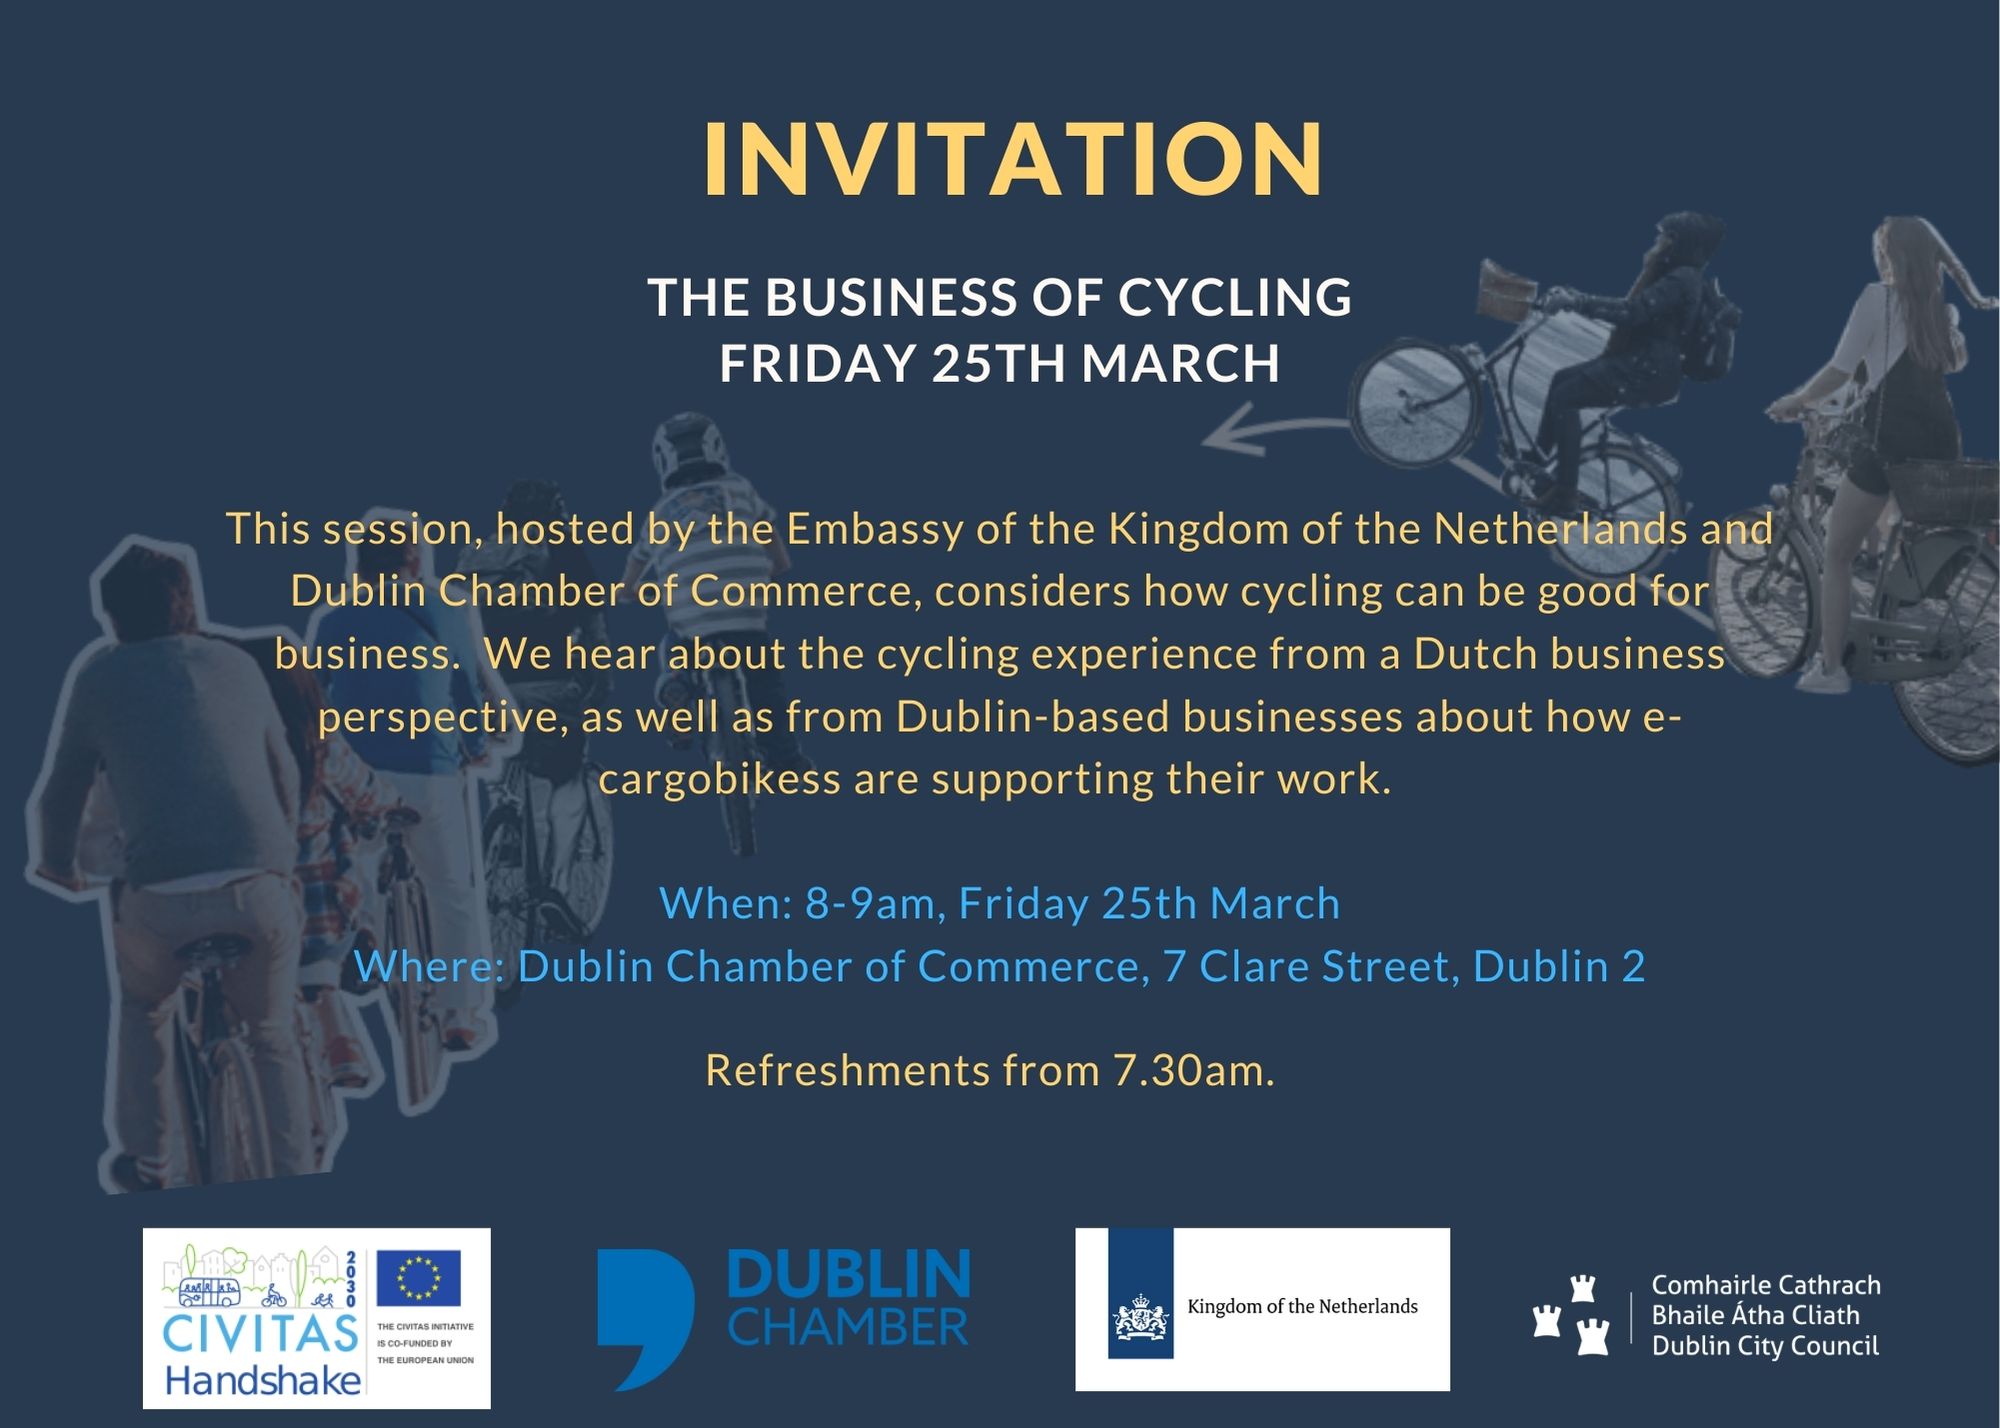 This image shows the invitation for the business of cycling session. An accessible version of this is available at the bottom of this page.